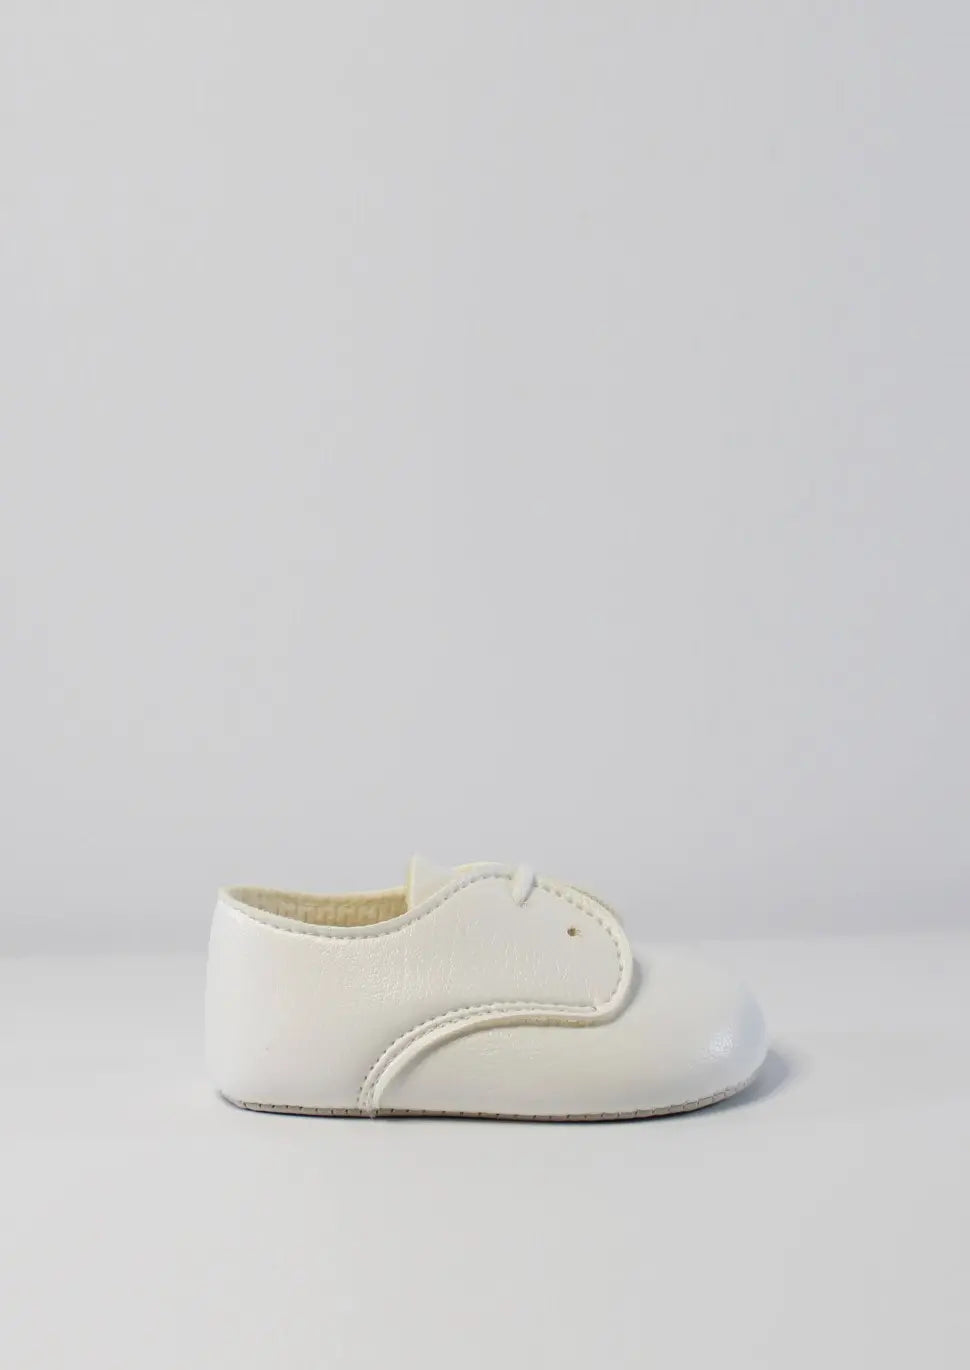 Boys White Laced shoes by Baypods